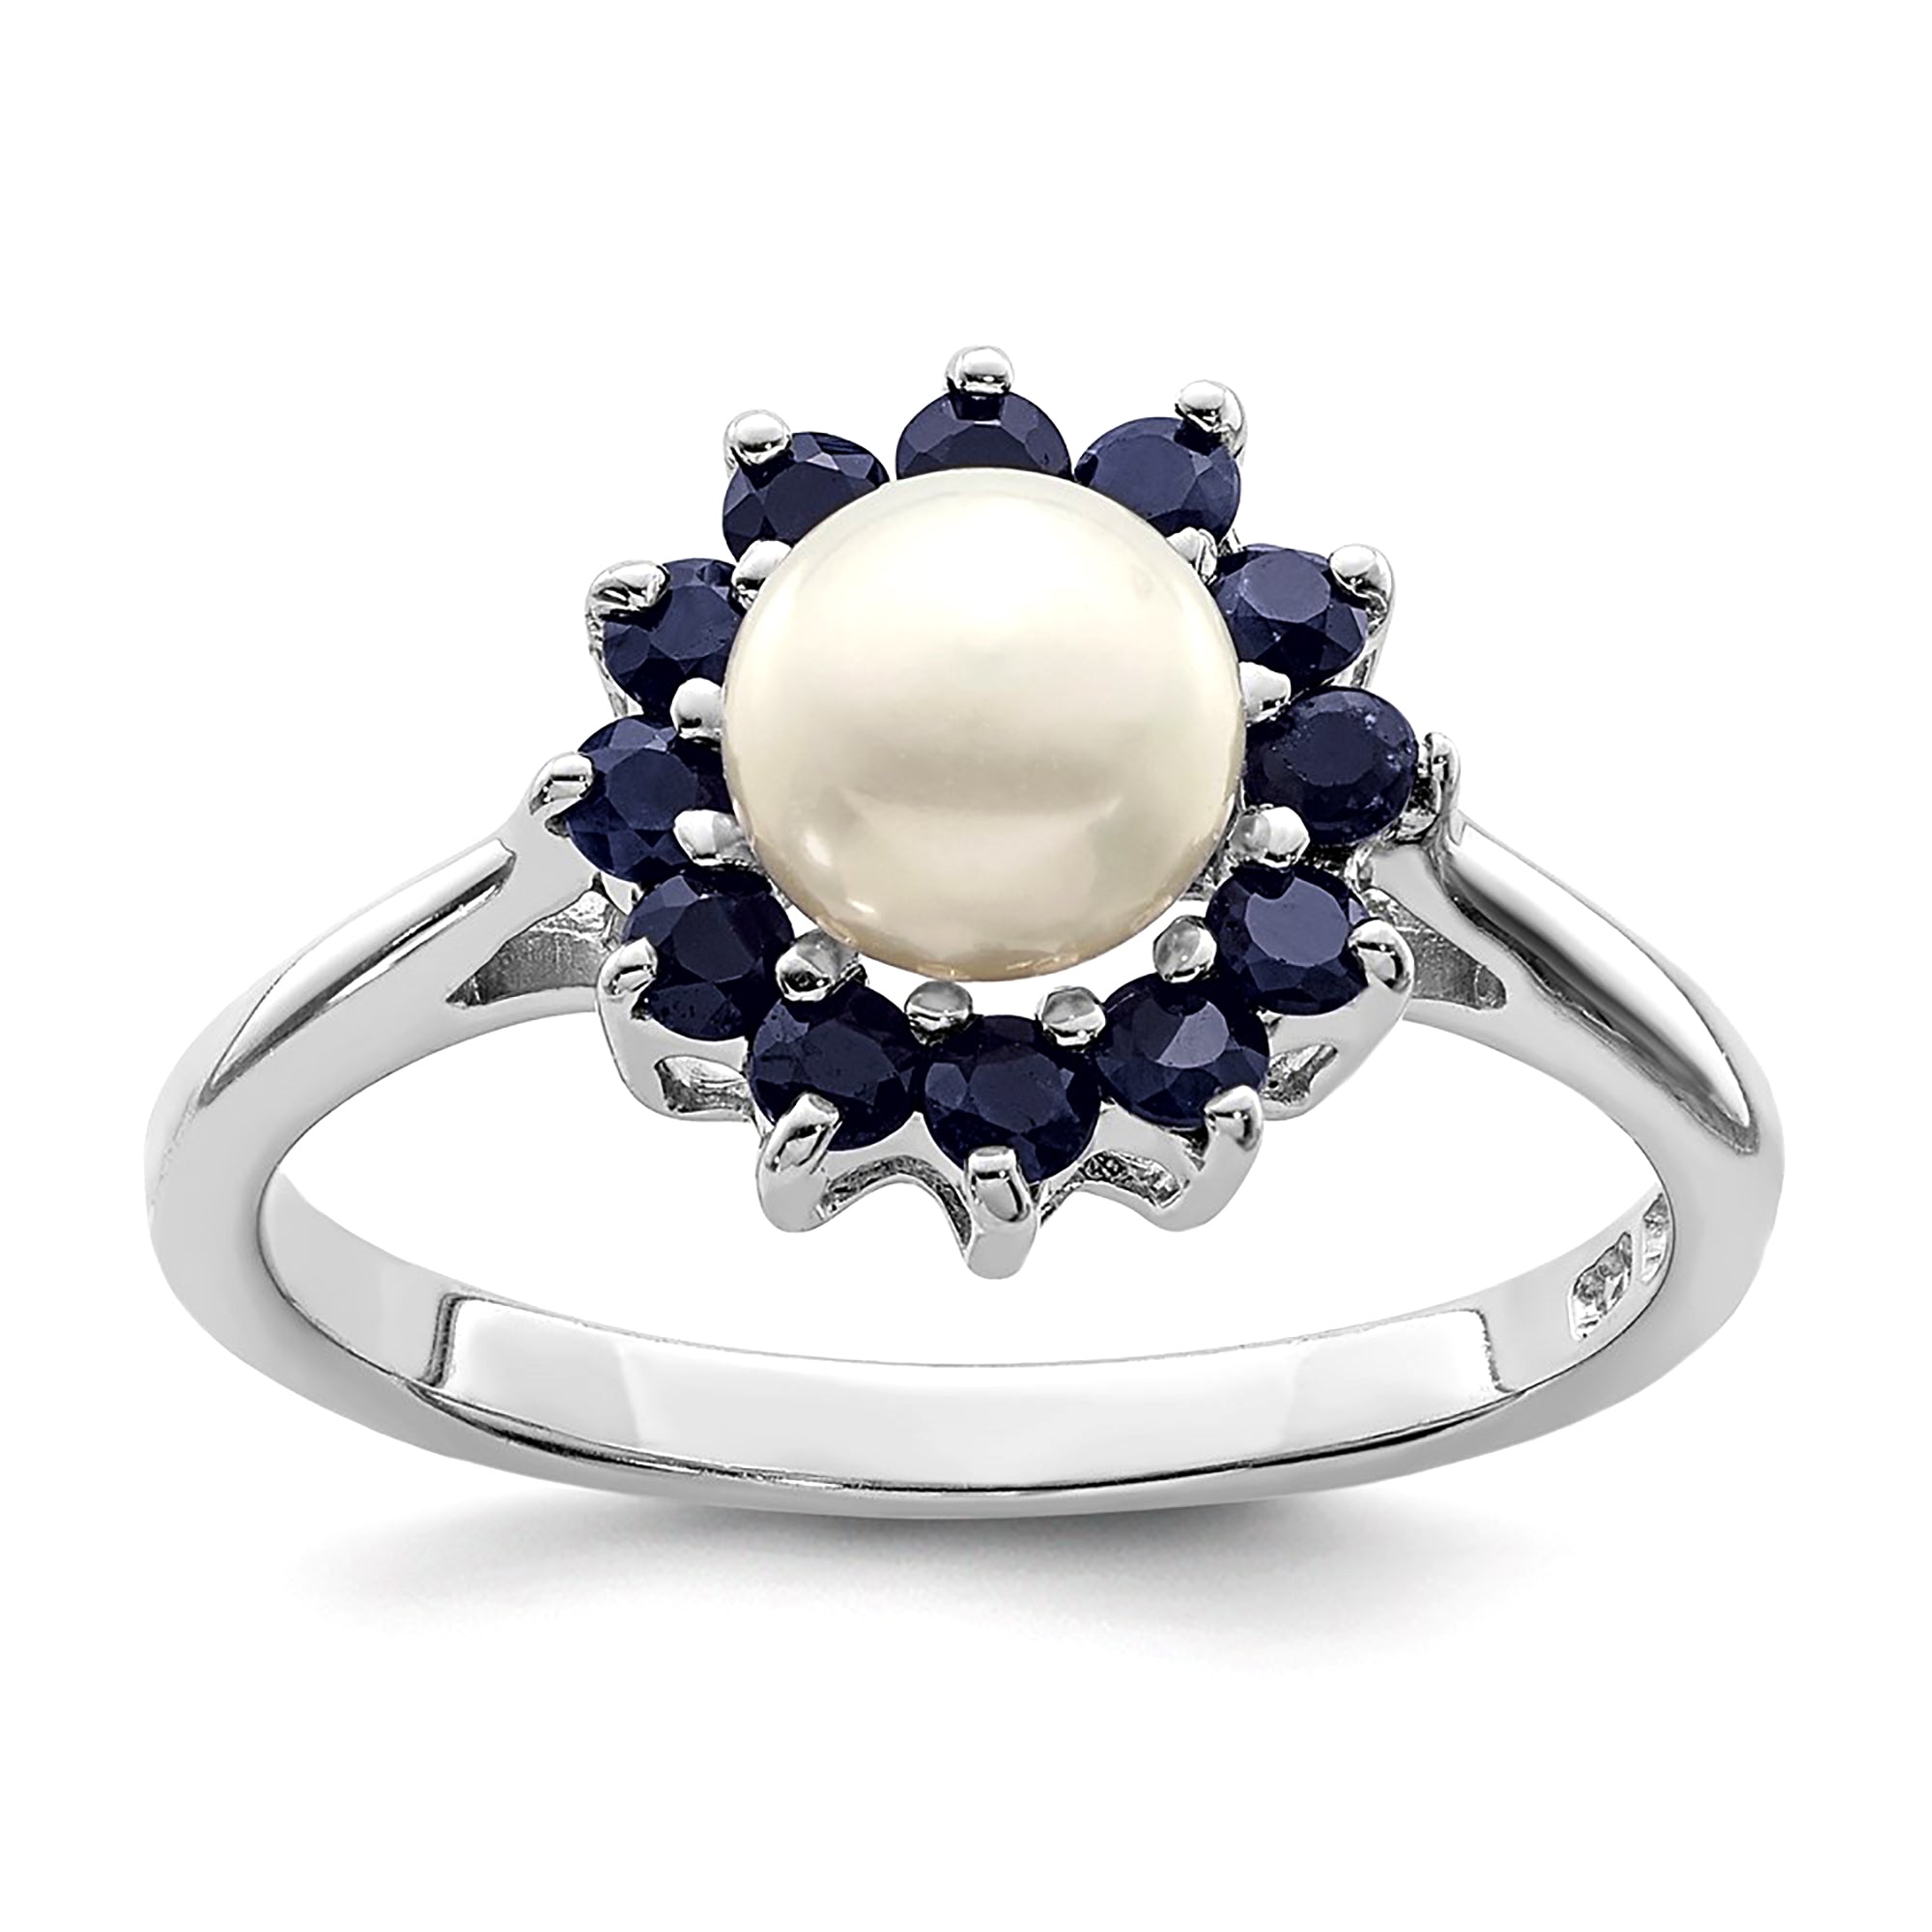 Sterling Silver Rhodium Plated 6mm Pearl and Sapphire Ring fine designer jewelry for men and women